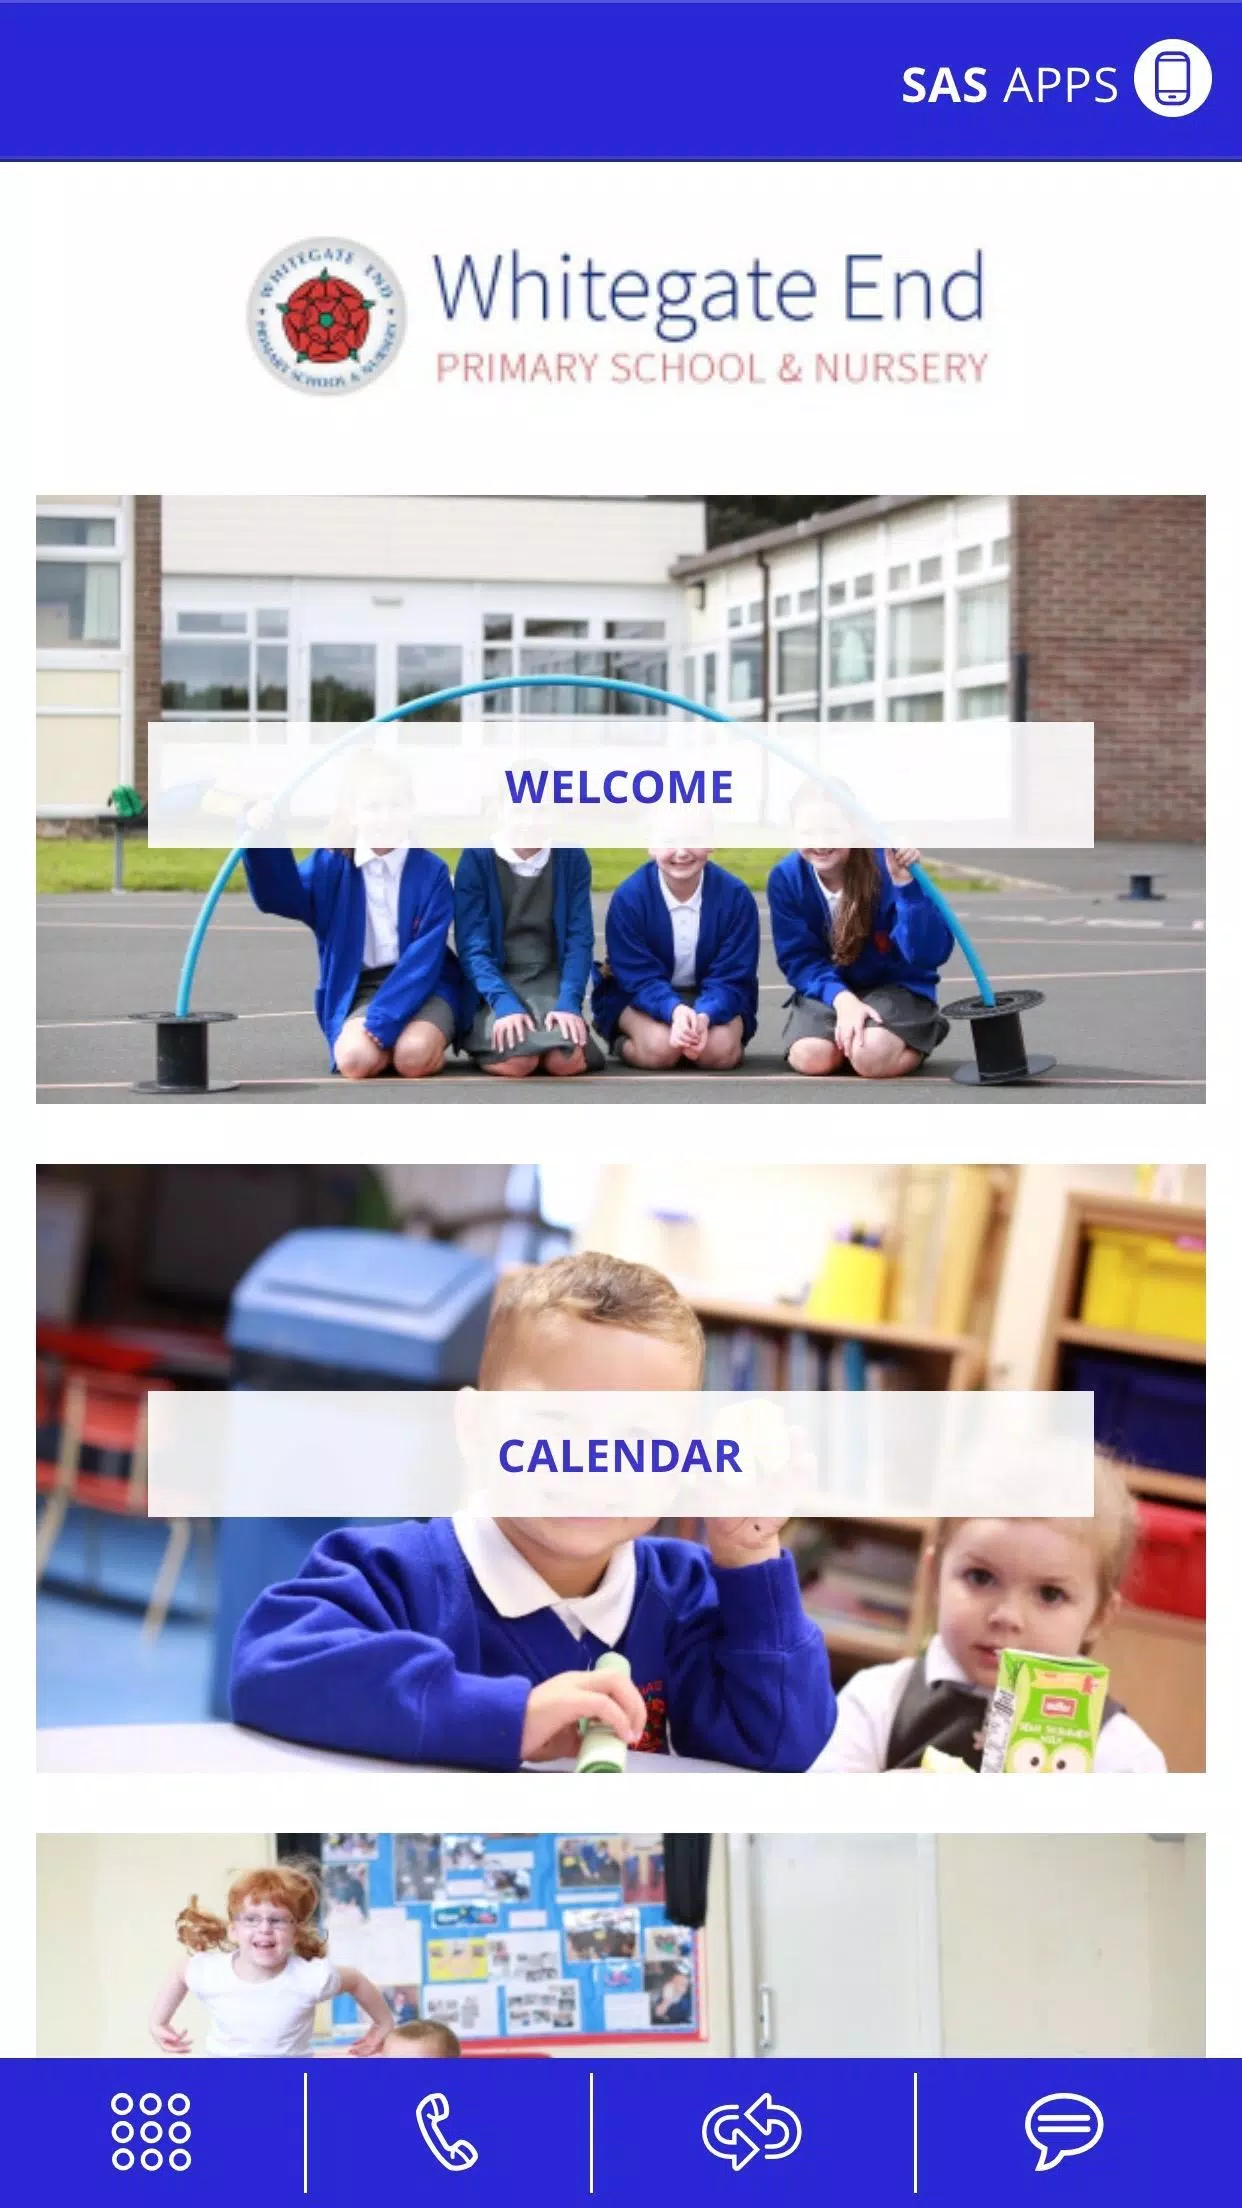 Brickhill Lower School APK (Android App) - Free Download